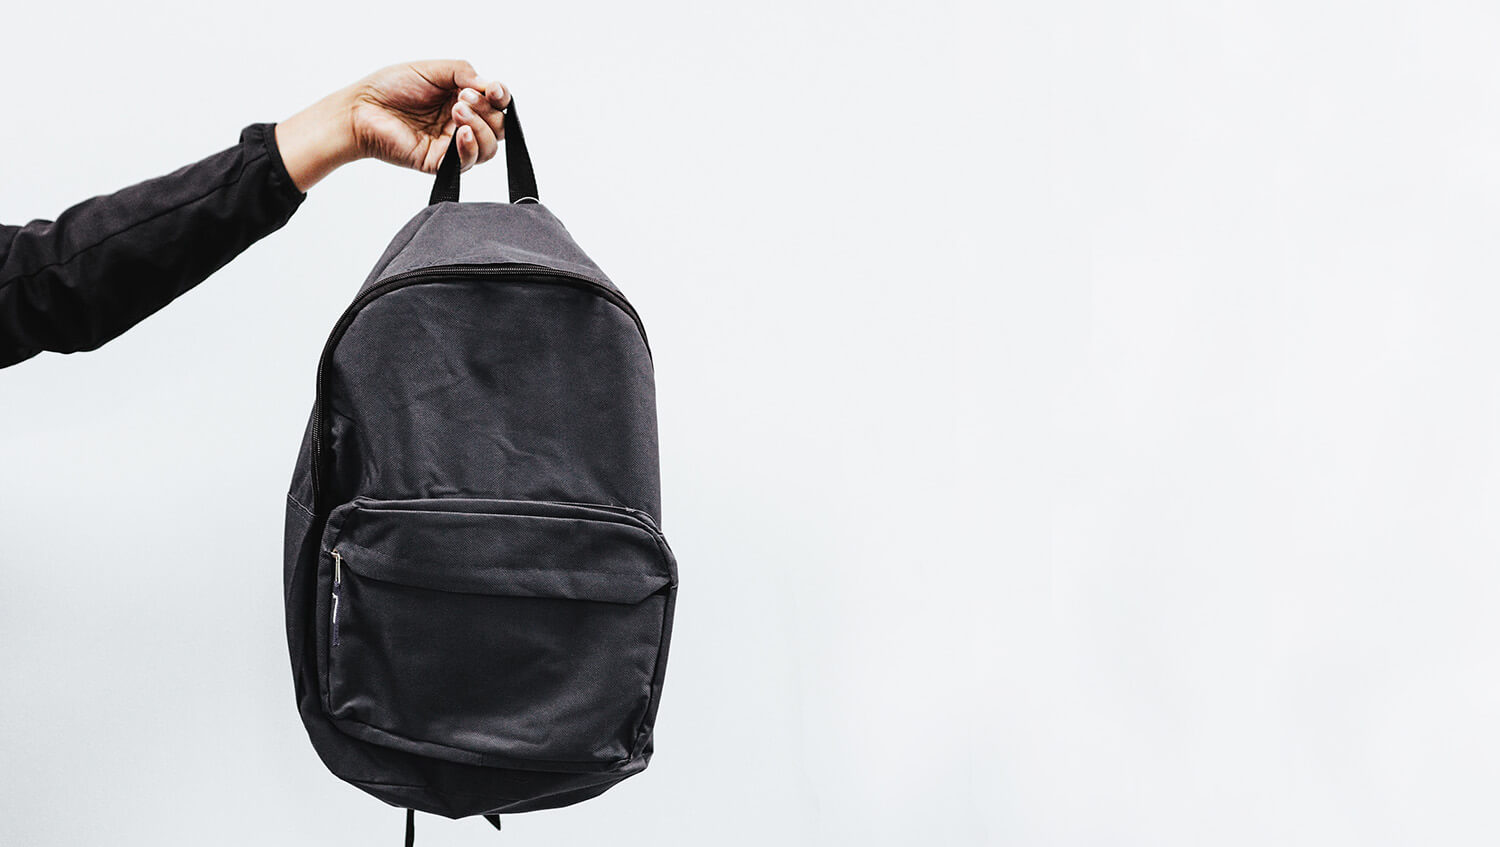 Arm holding a black rucksack against a white background